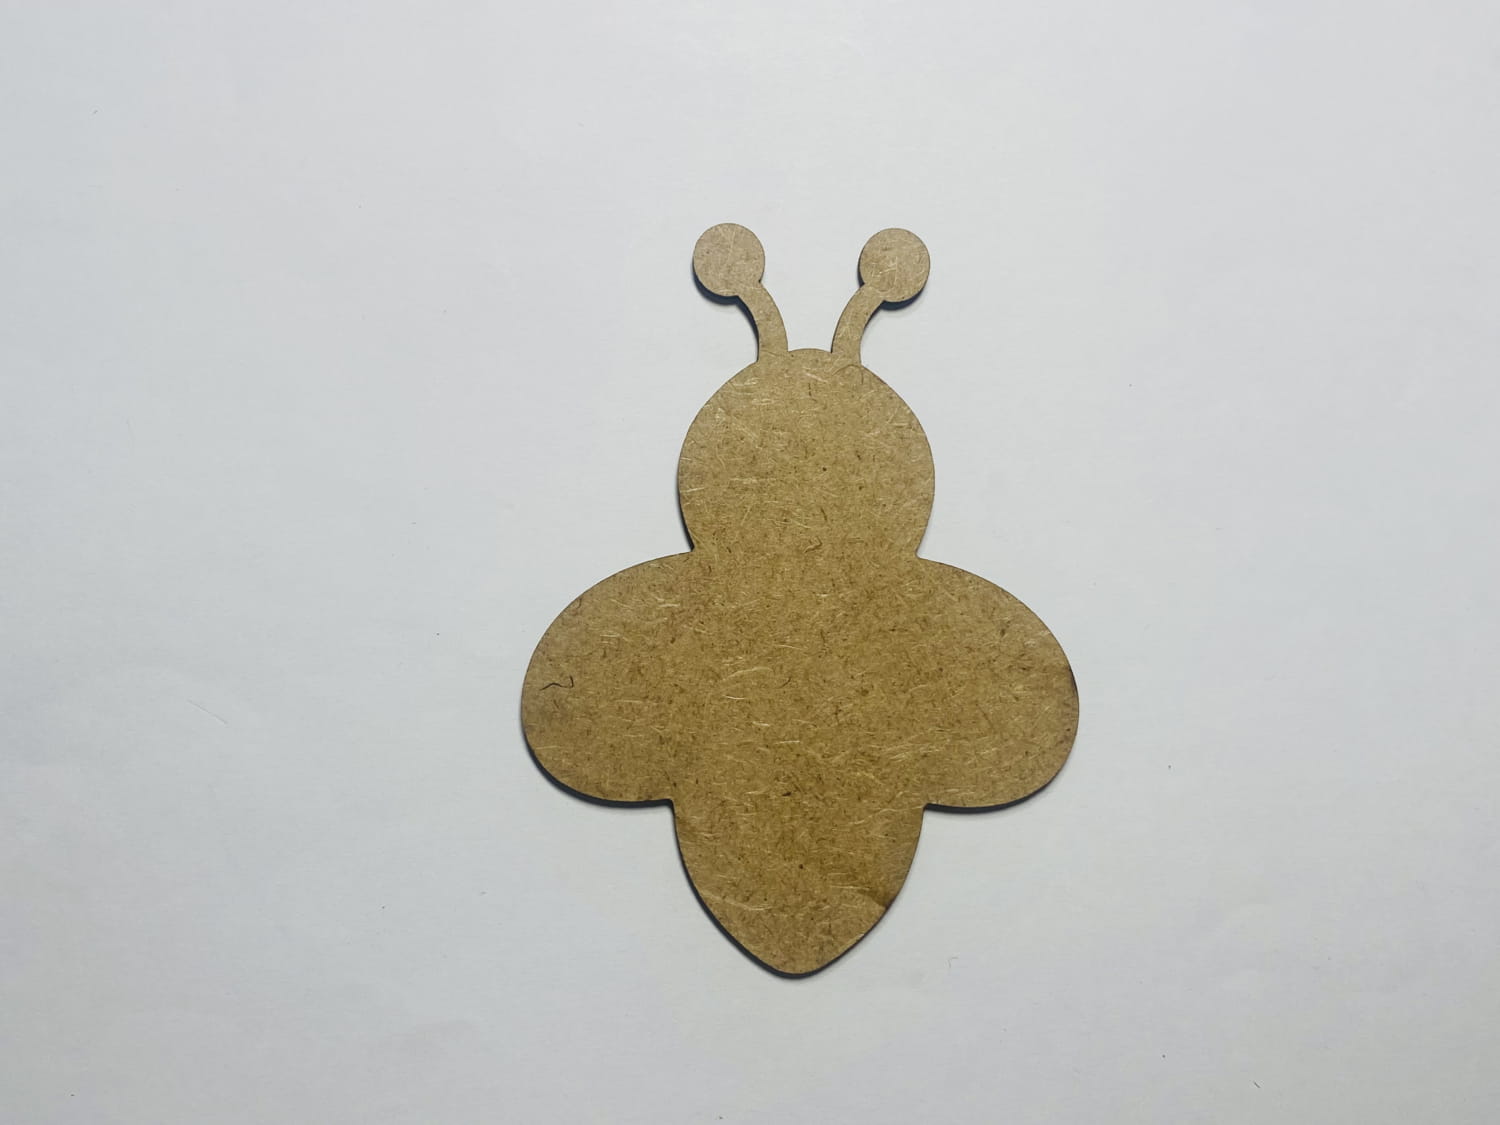 Laser Cut Wooden Bumble Bee Cutout Free Vector